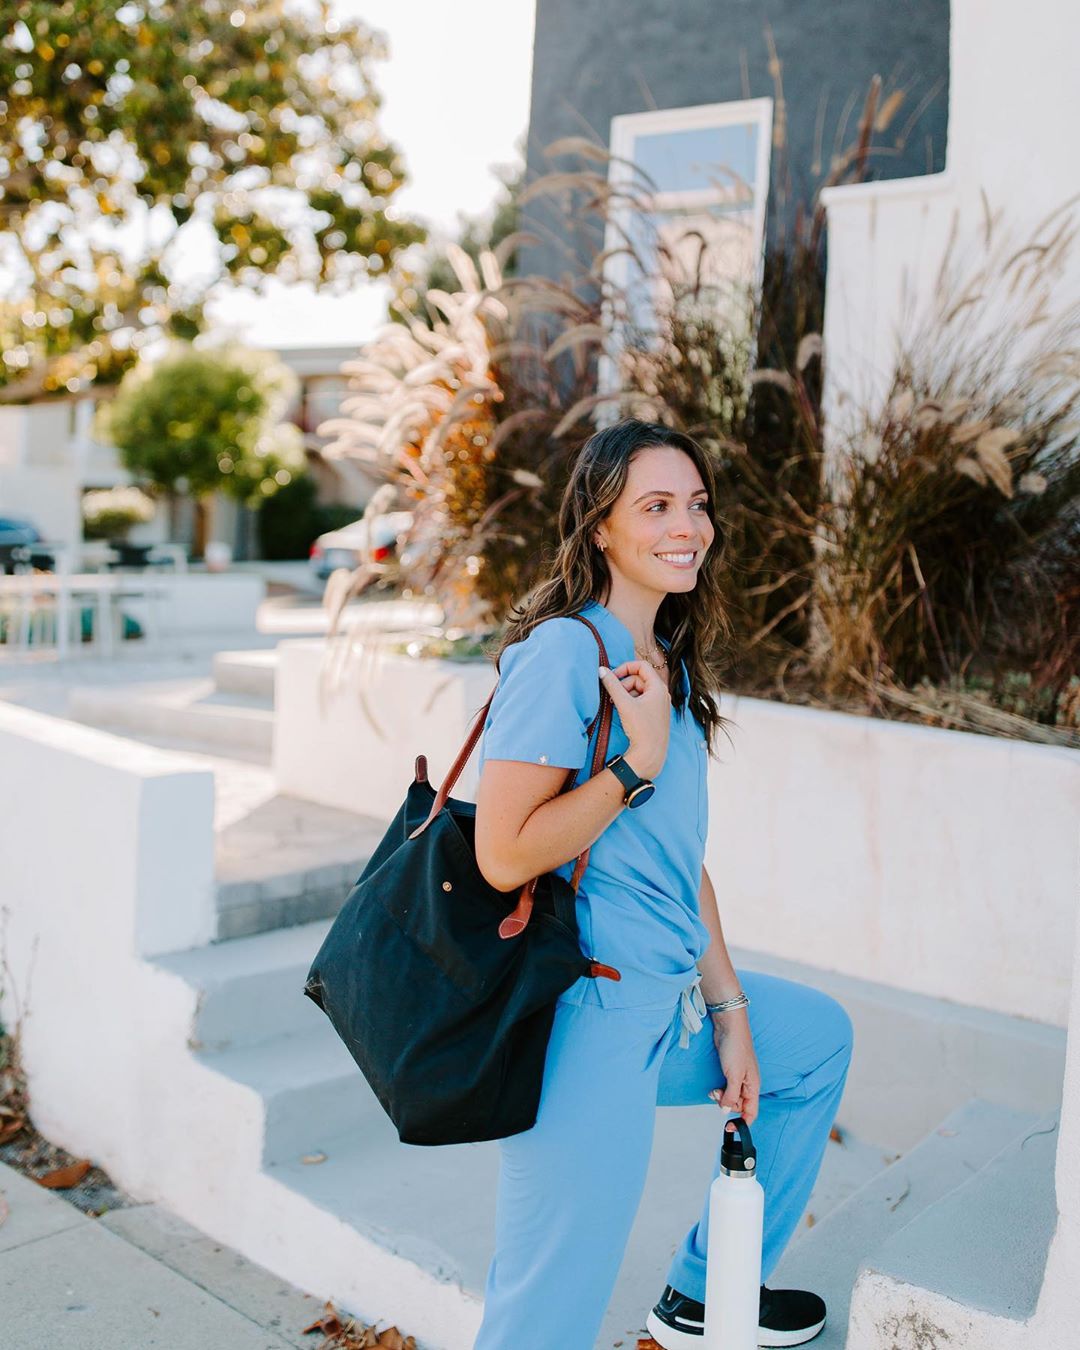 Nurse with a Traveling Bag Approaching Hospital Steps. Photo by Instagram user @becksliveshealthy